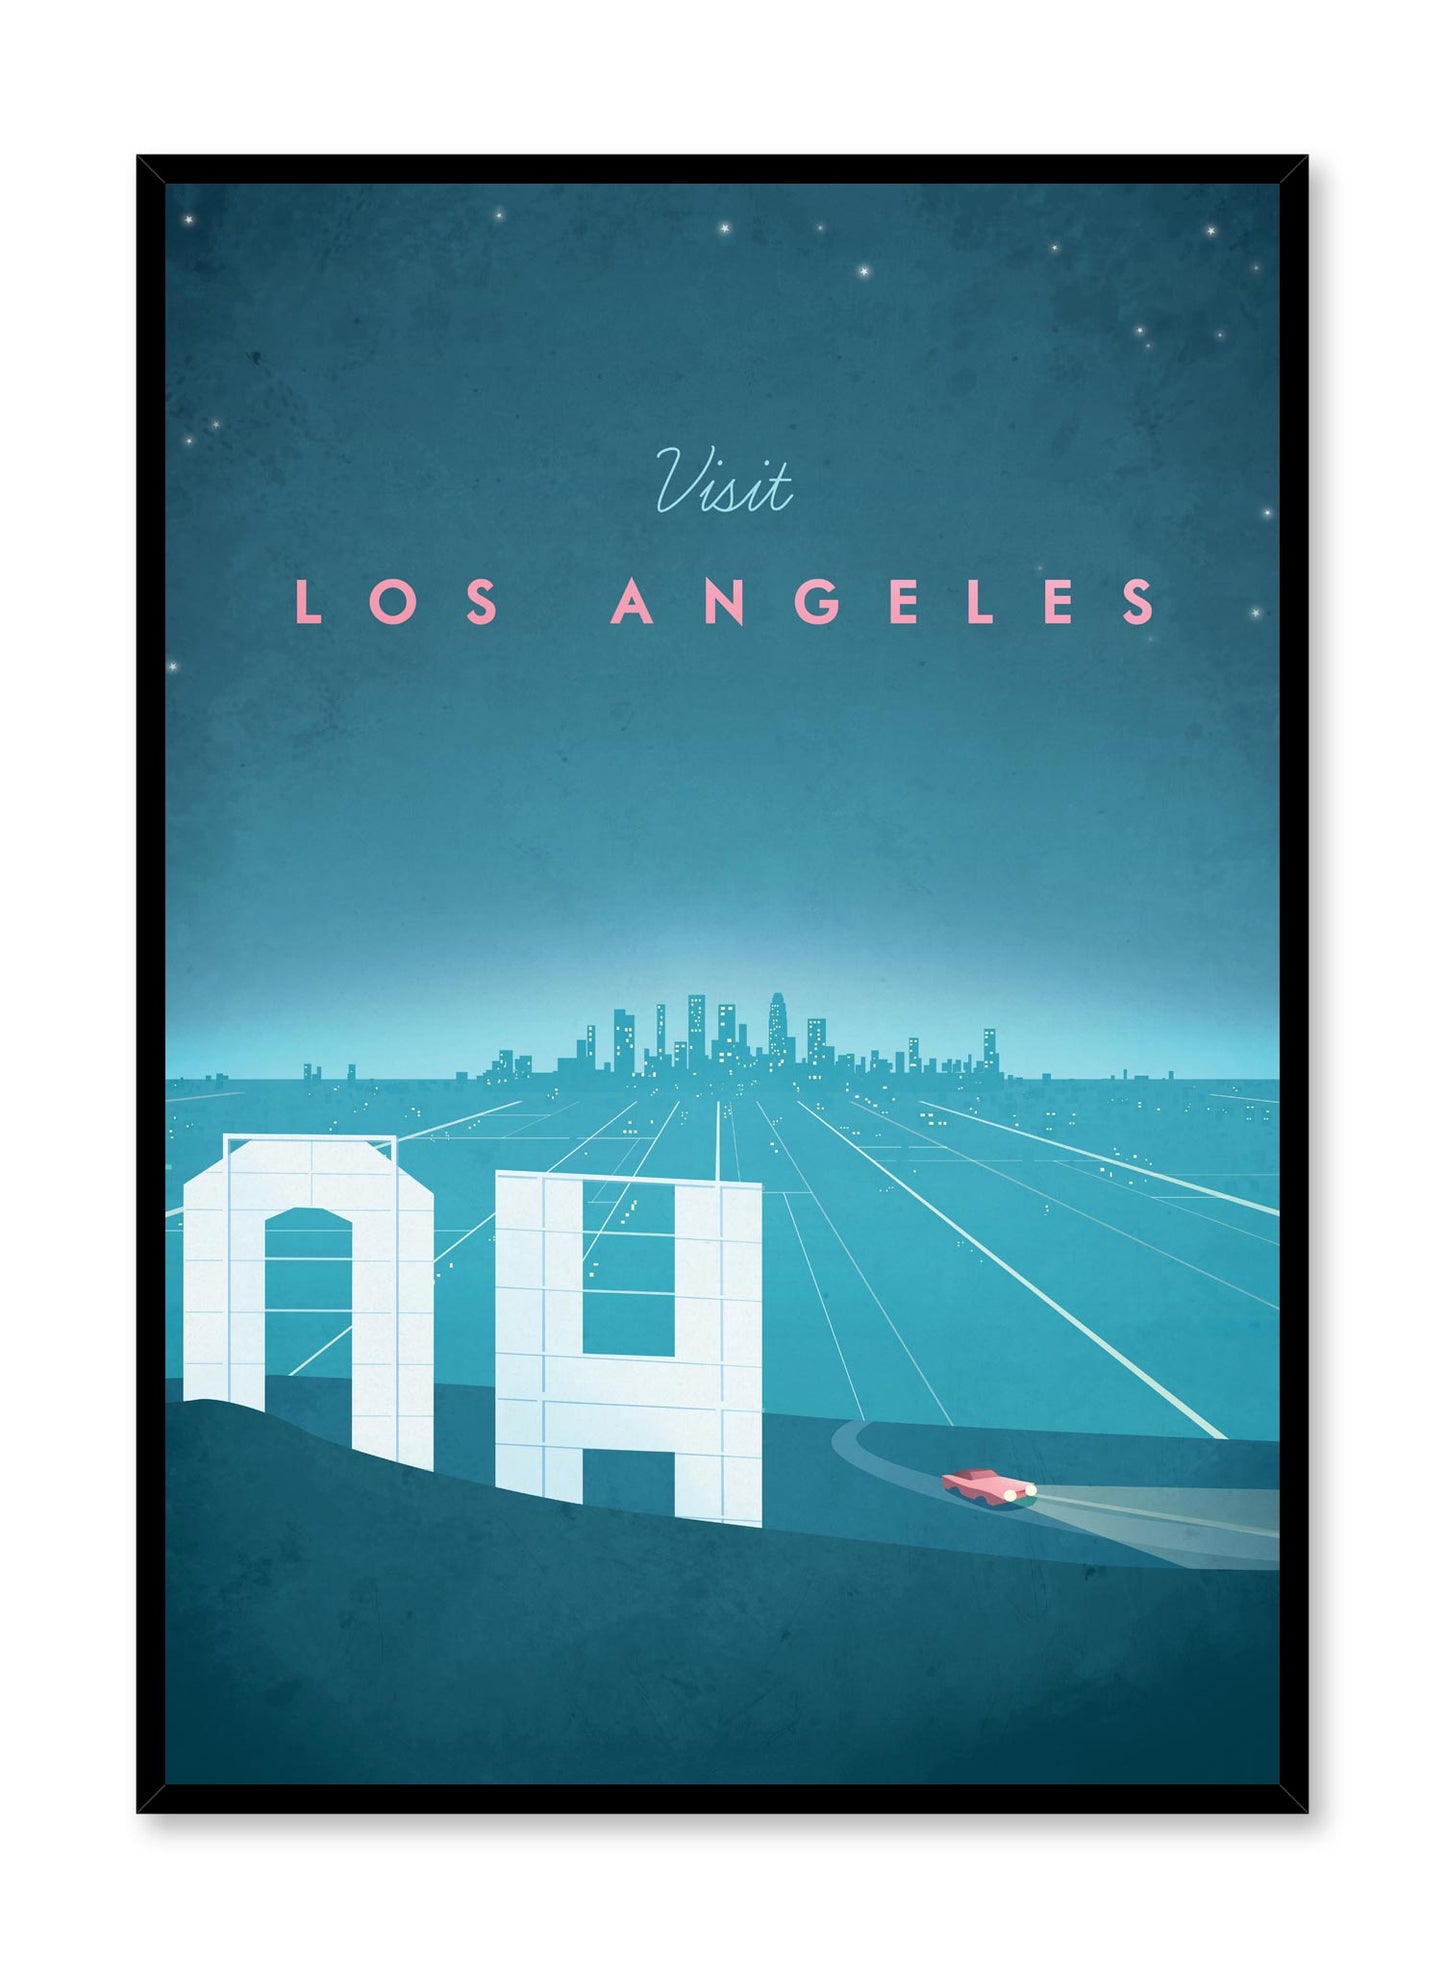 Modern minimalist travel poster by Opposite Wall with illustration of Los Angeles